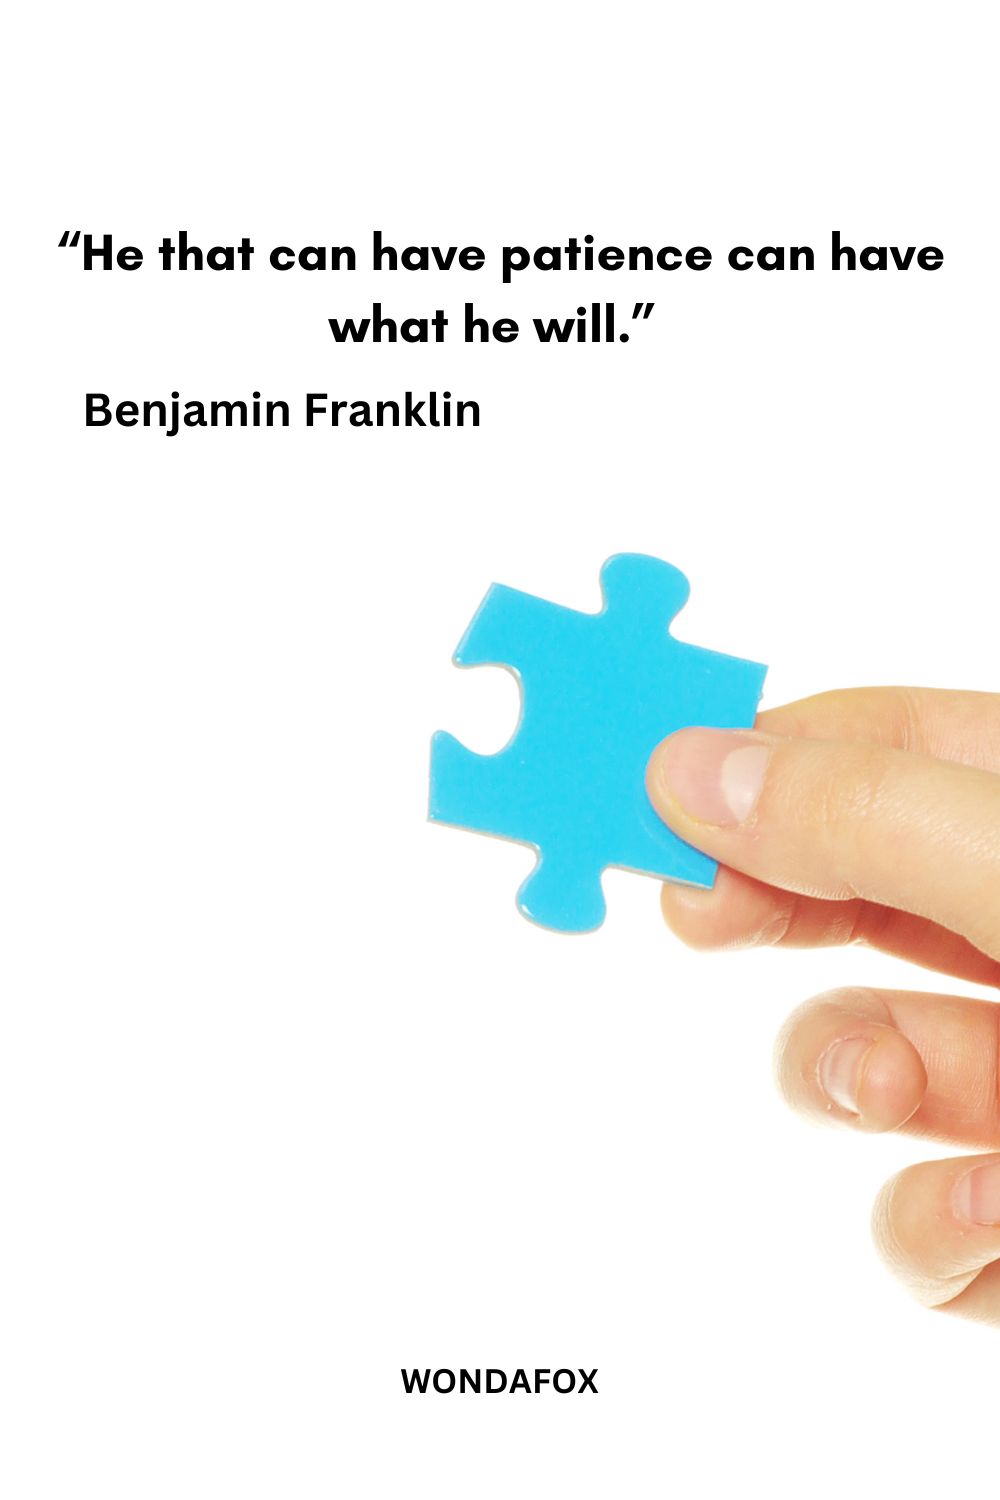 “He that can have patience can have what he will.” 
Benjamin Franklin